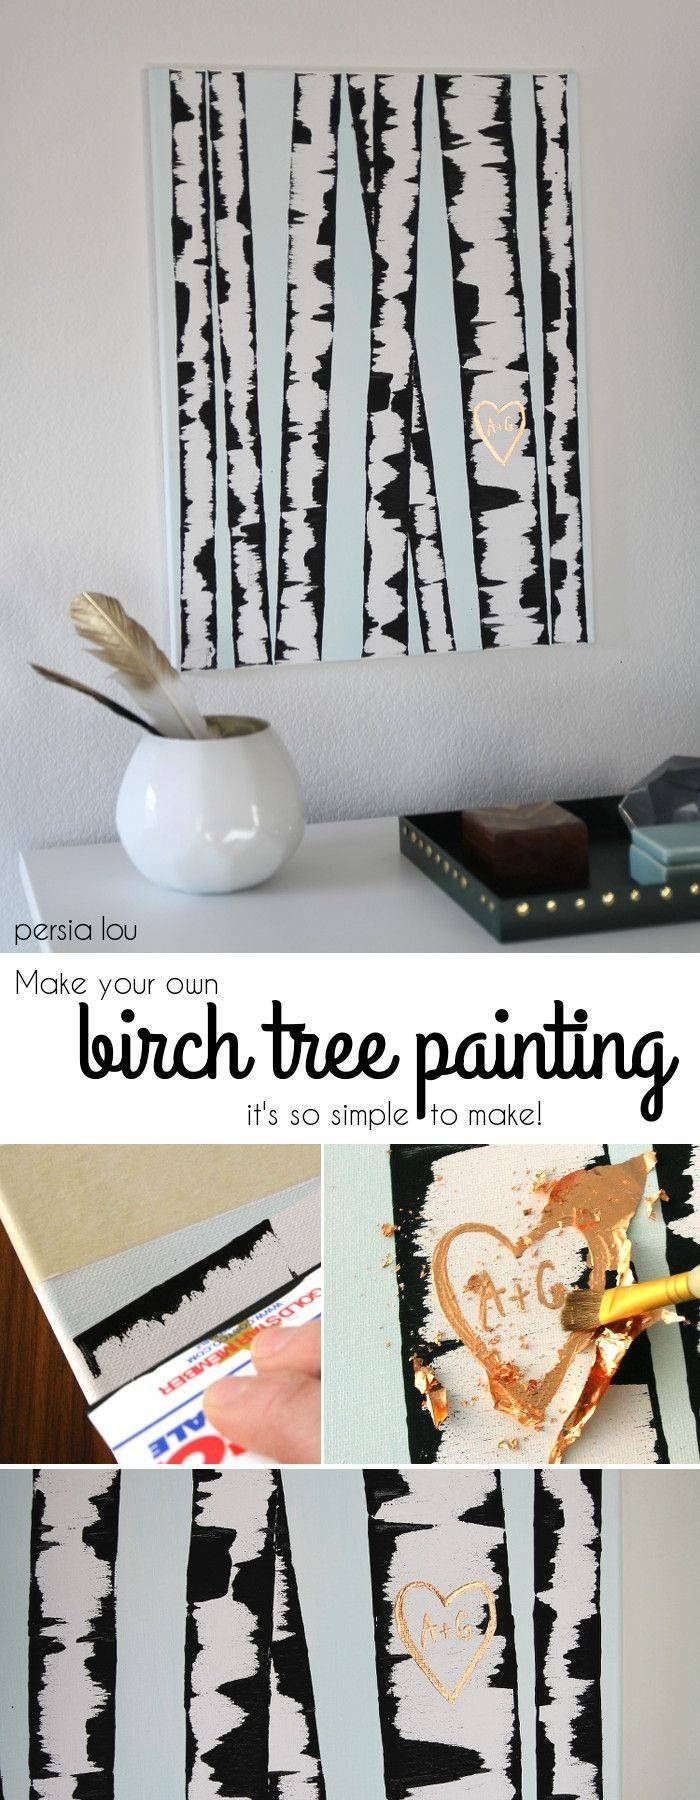 25+ Unique Diy Wall Art Ideas On Pinterest | Diy Wall Decor, Diy With Most Recently Released Pinterest Diy Wall Art (Gallery 1 of 25)